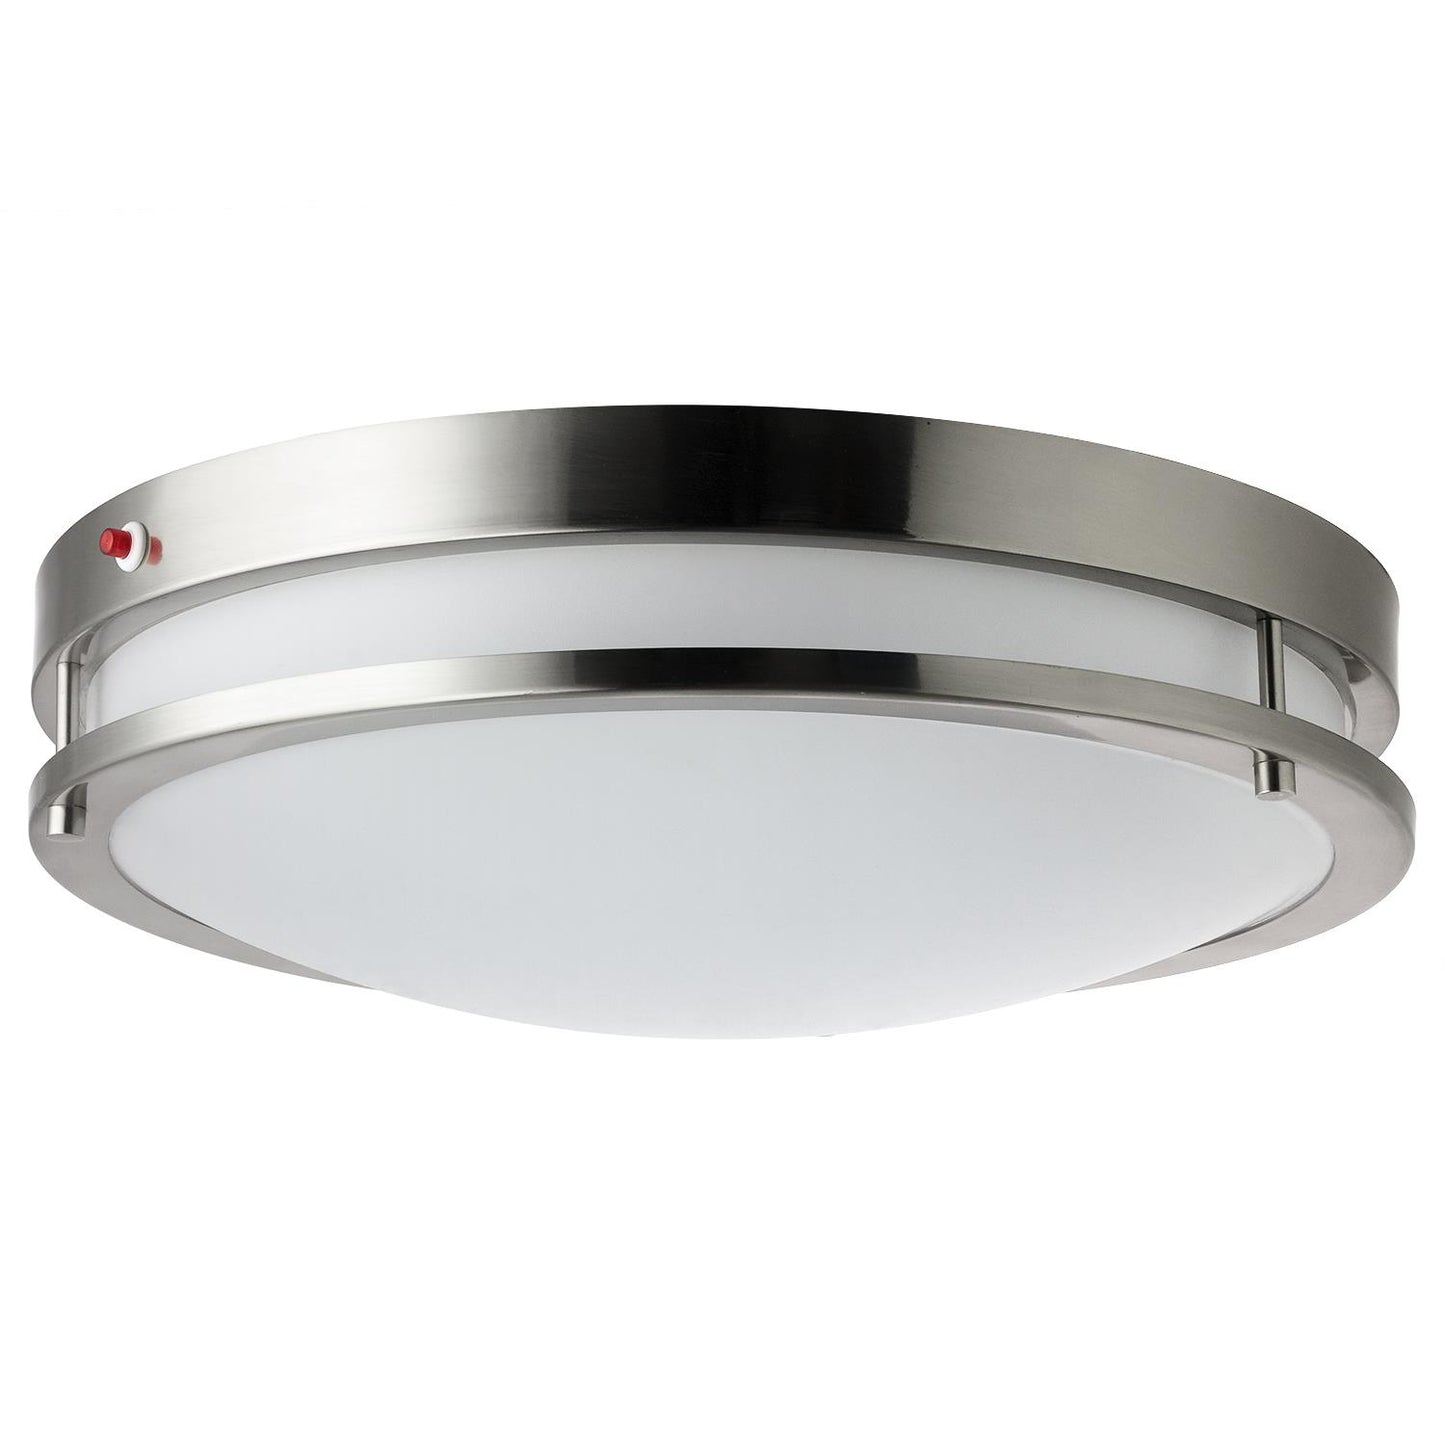 Sunlite 45603-SU LED 12-Inch Decorative Ceiling Light Fixture, Built-In Emergency Backup Battery, 20 Watt (150W Equivalent, 1600 Lumen, Brushed Nickel Finish, Dimmable, ETL Listed, 40K - Cool White